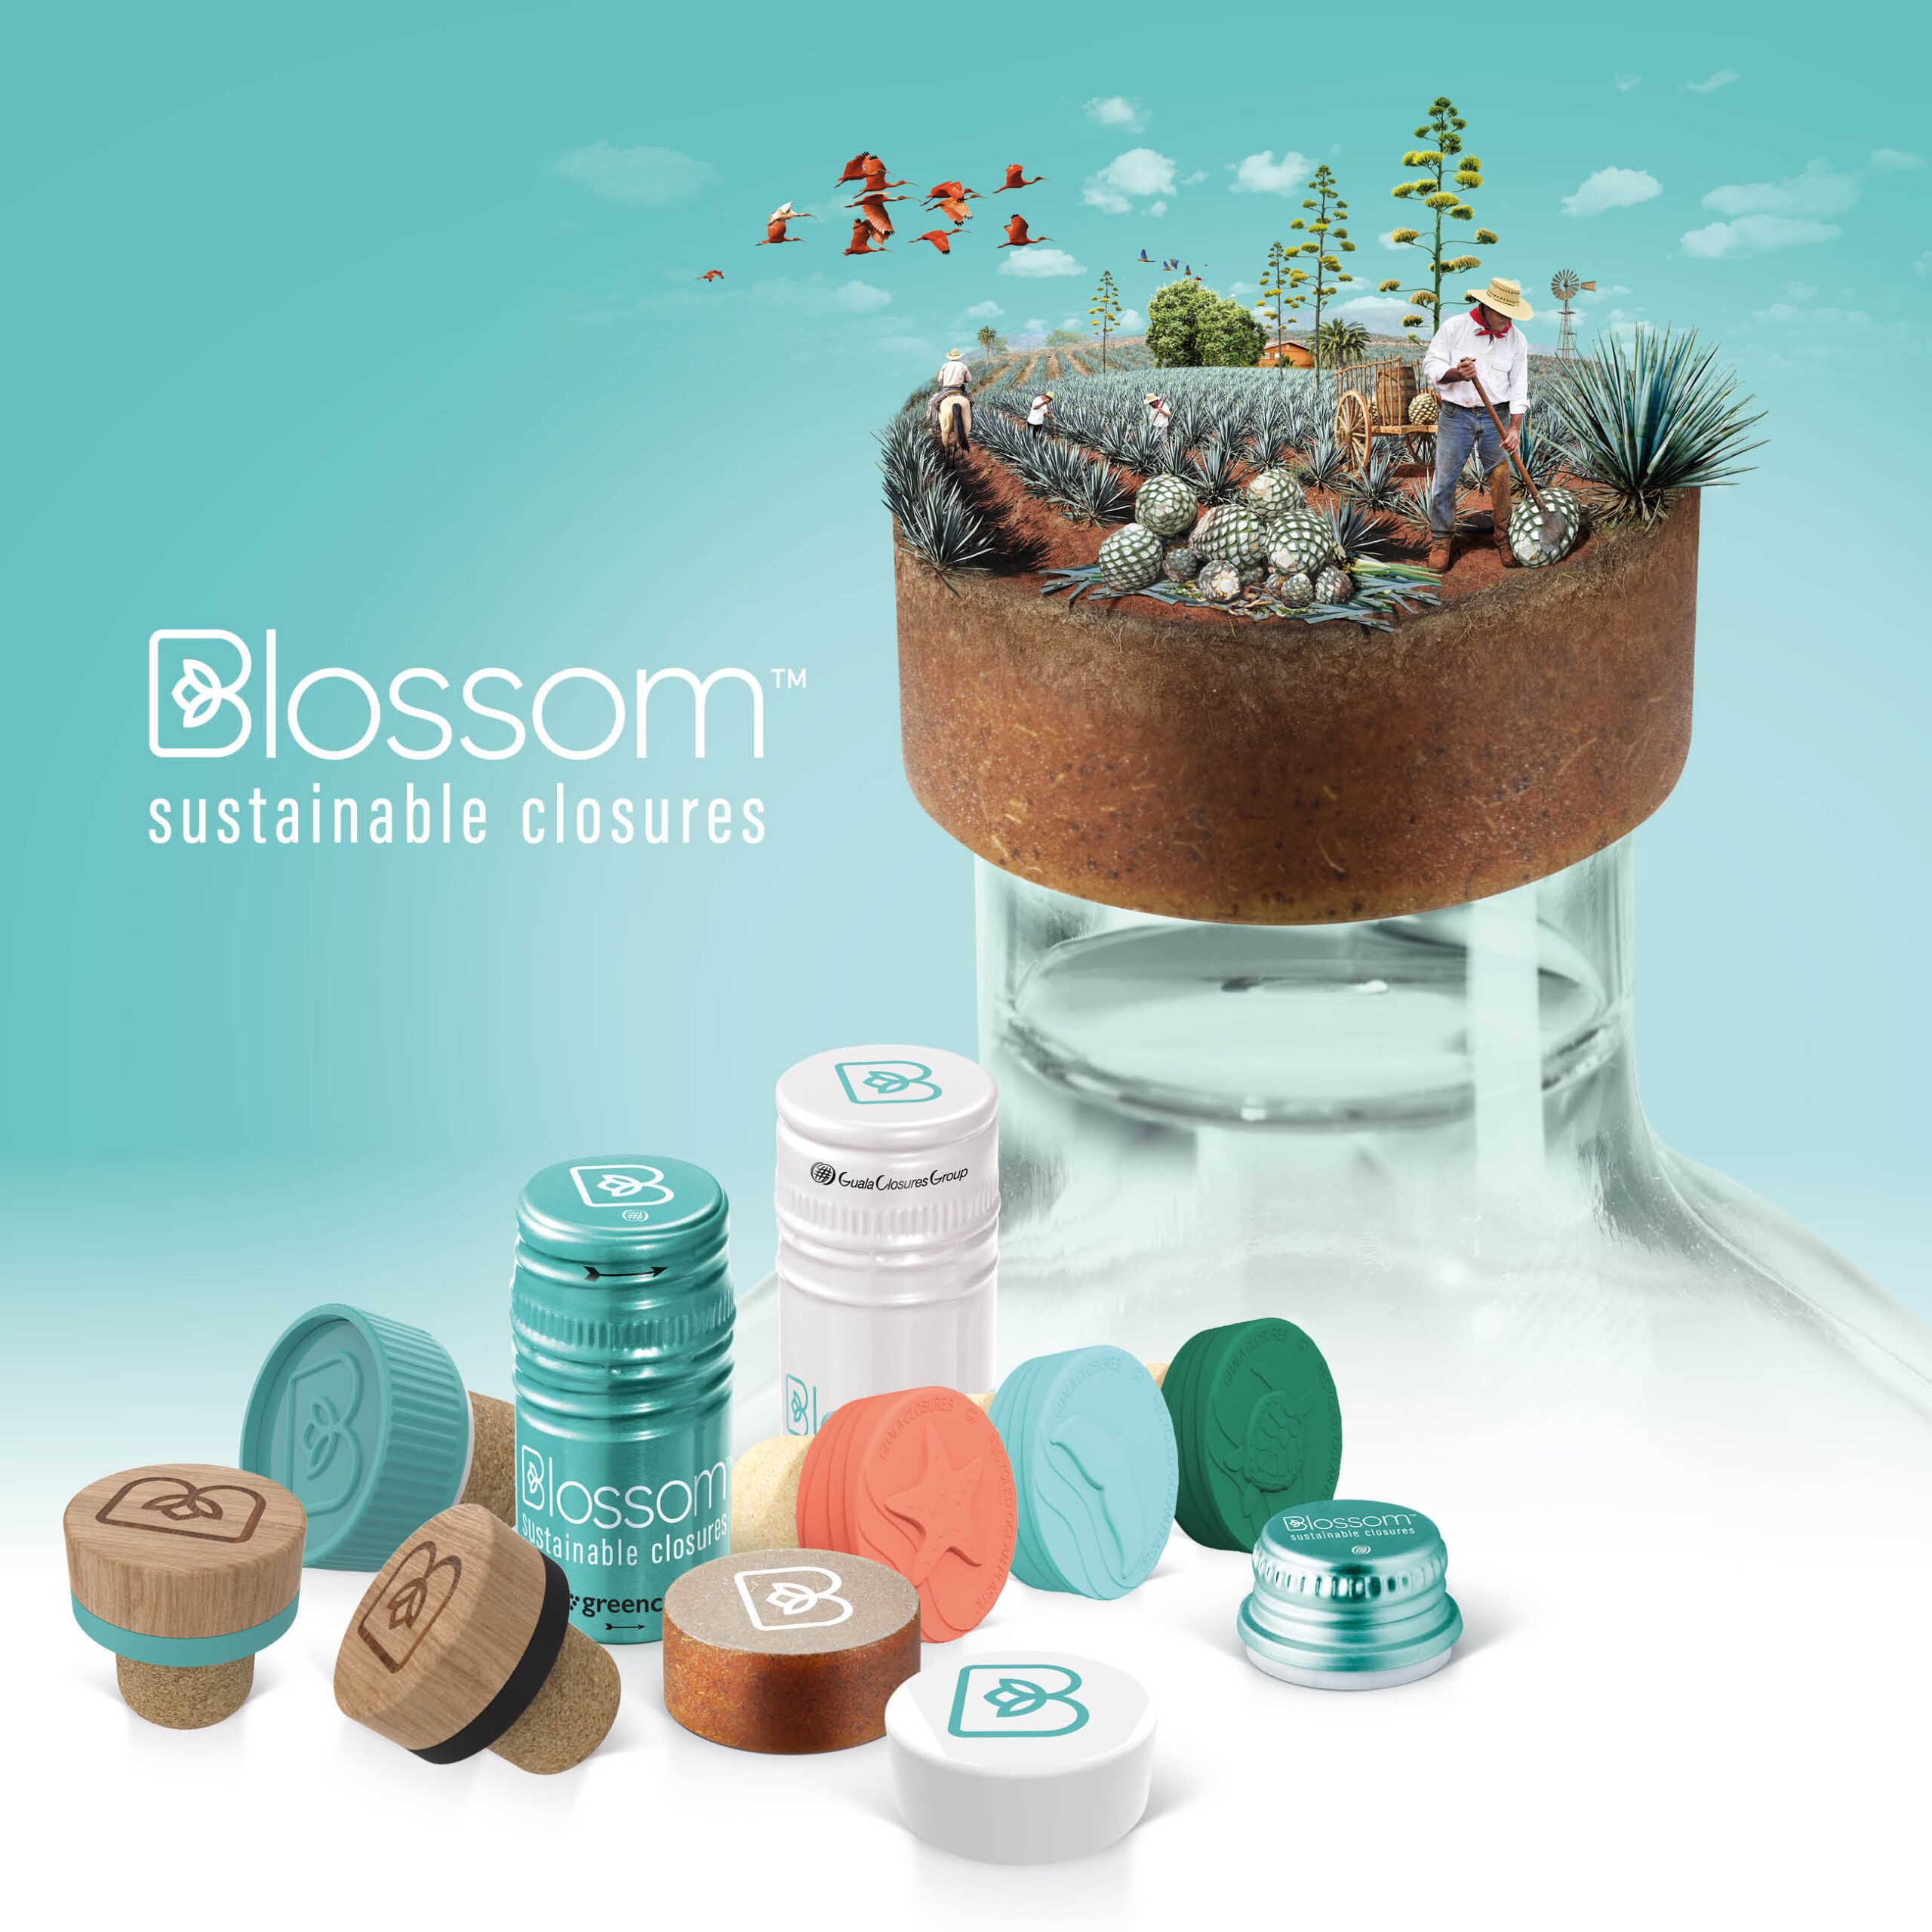 Goula Closures launches sustainable closures range under the brand name “Blossom”